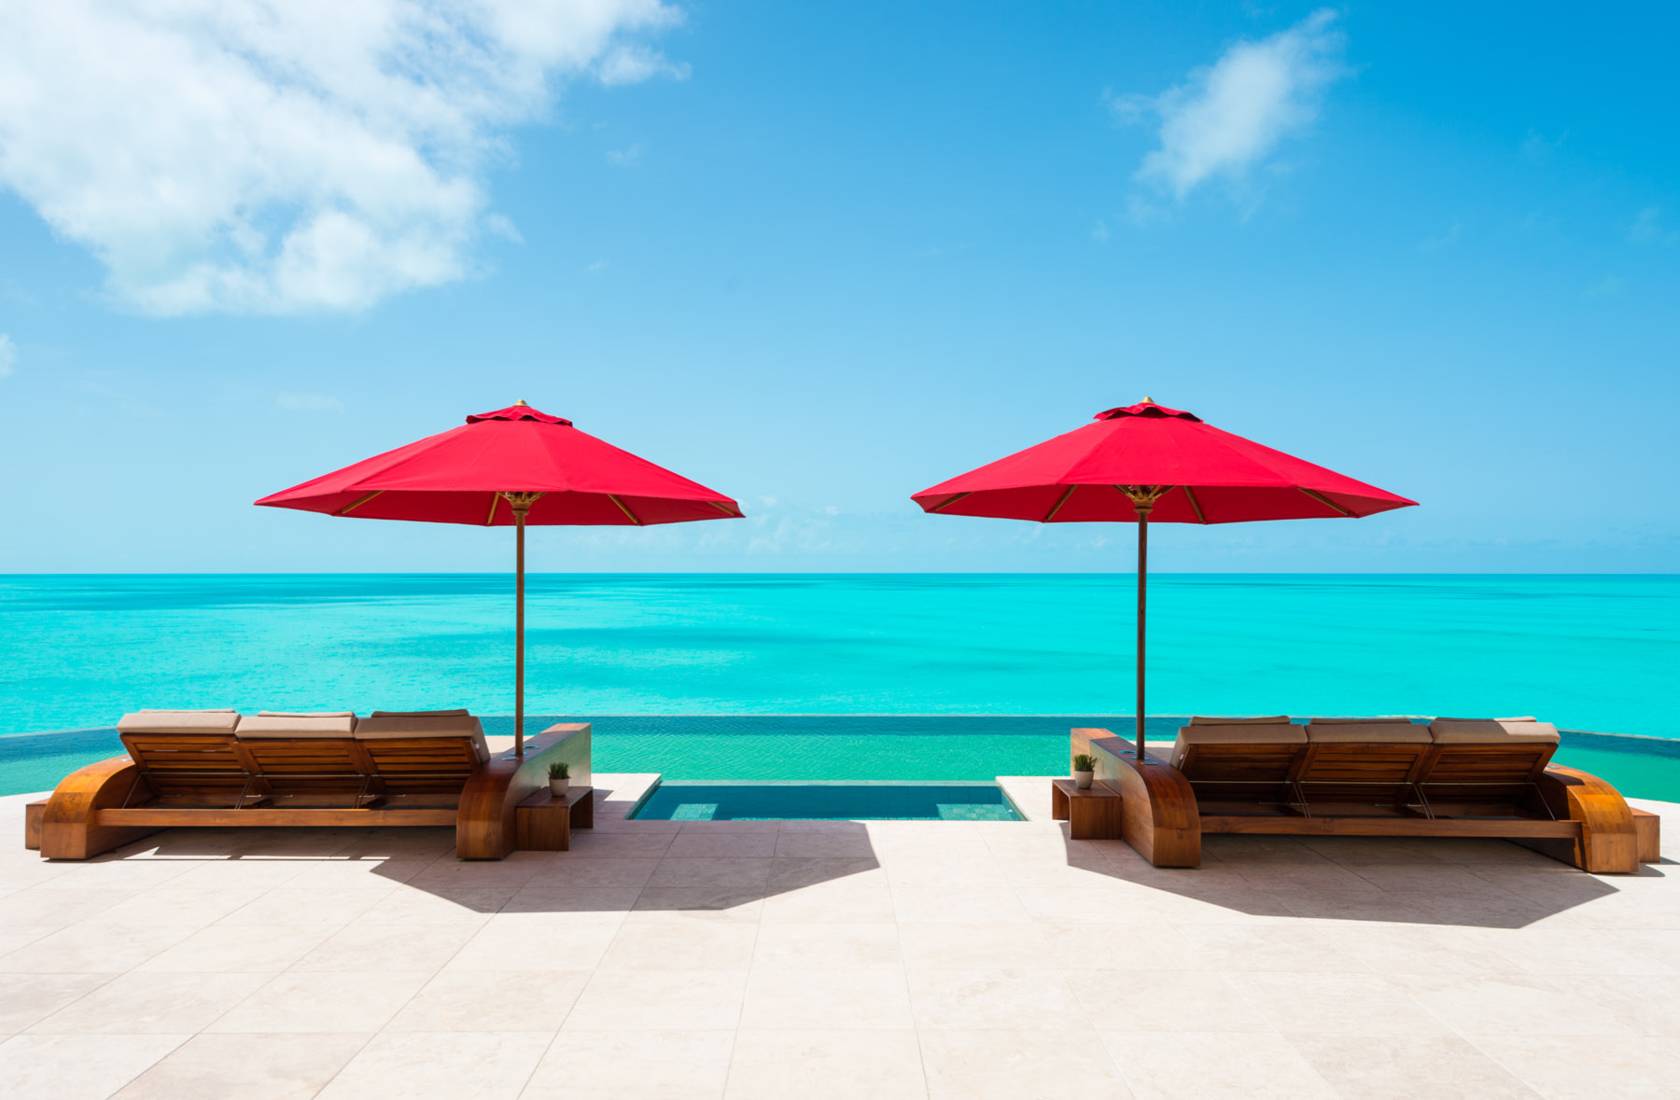 Villa Balinese poolside loungers and umbrellas overlooking Turks and Caicos shore